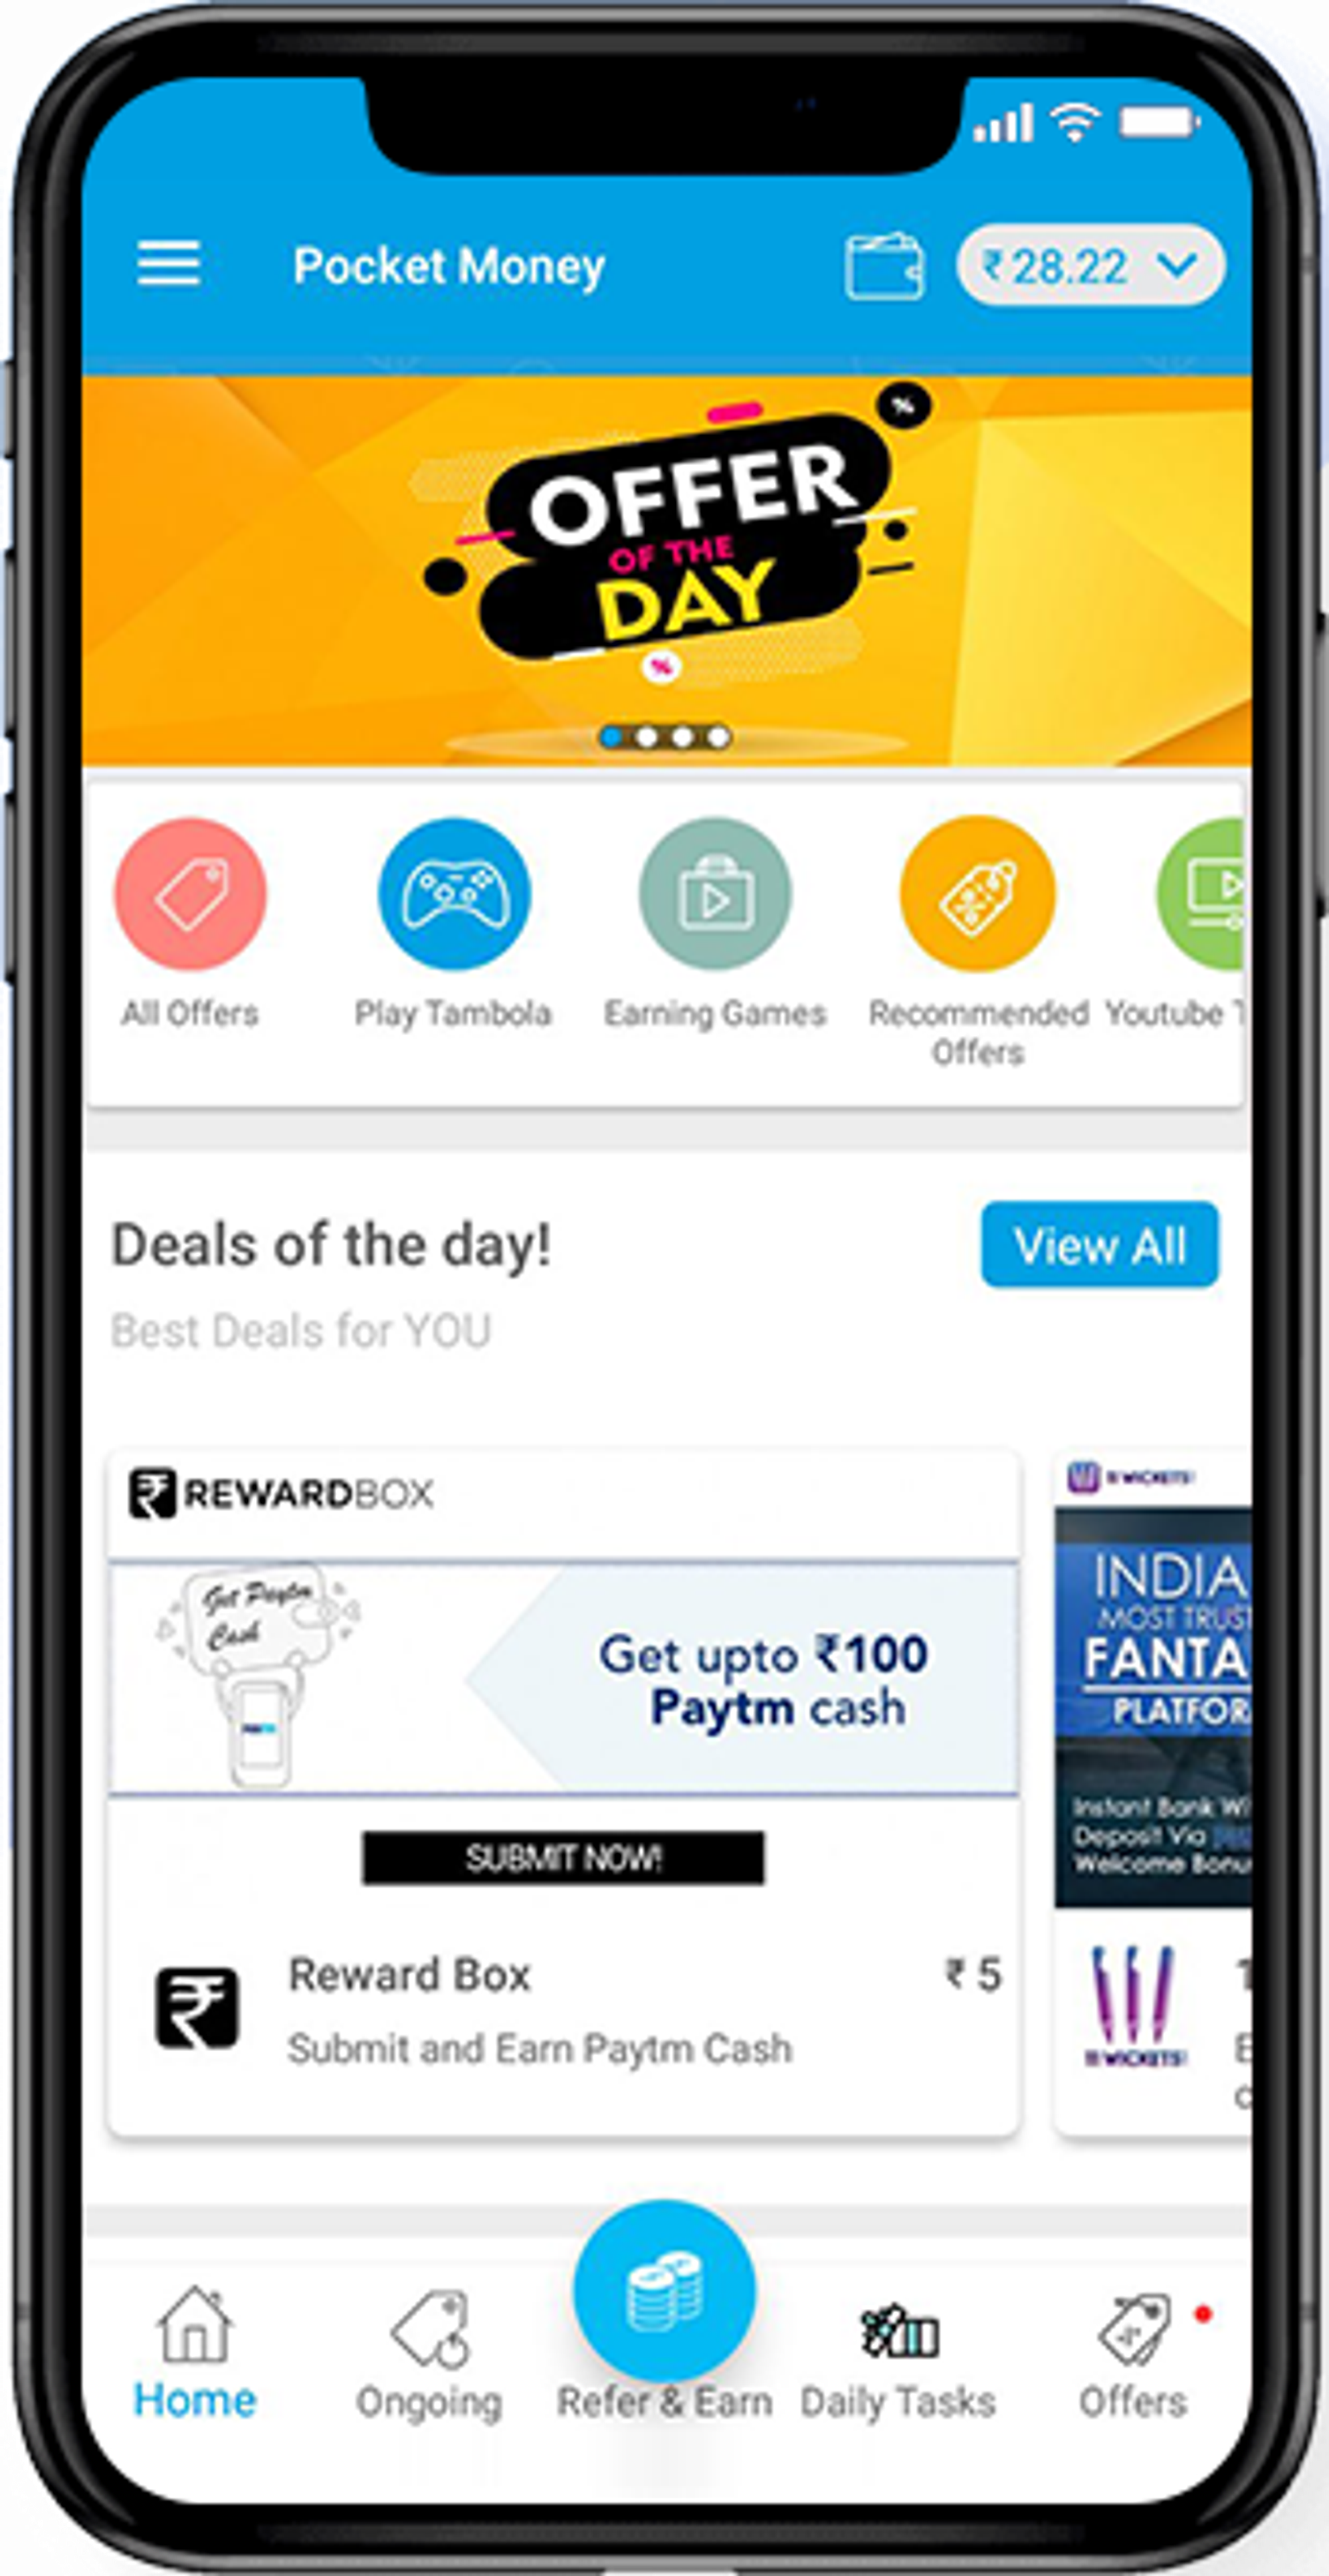 Pocket Money: The easiest way to earn free mobile recharge & Paytm cash